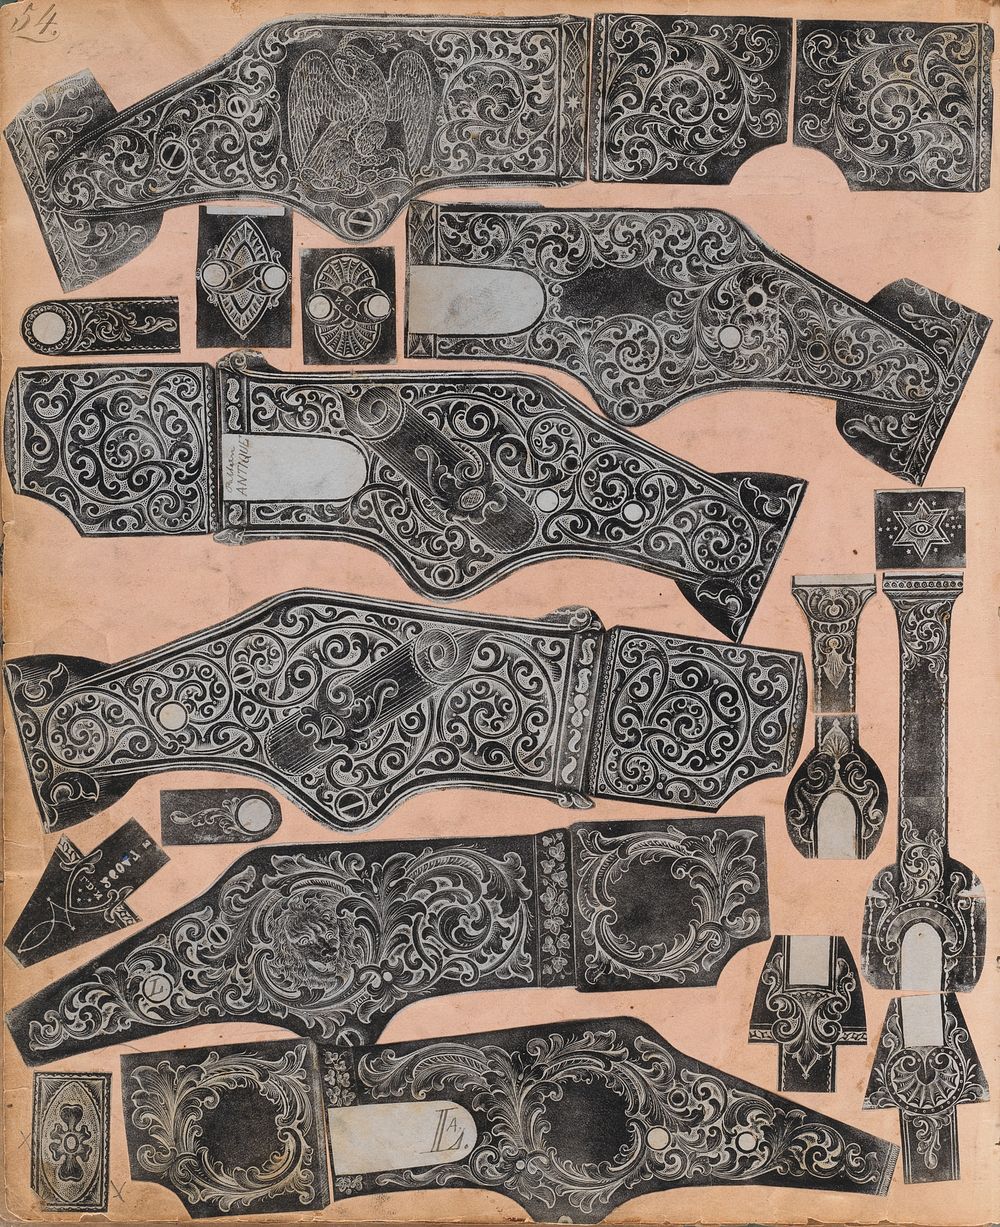 Workbook Recording the Engraved Firearms Ornament of Louis D. Nimschke (1832-1904)